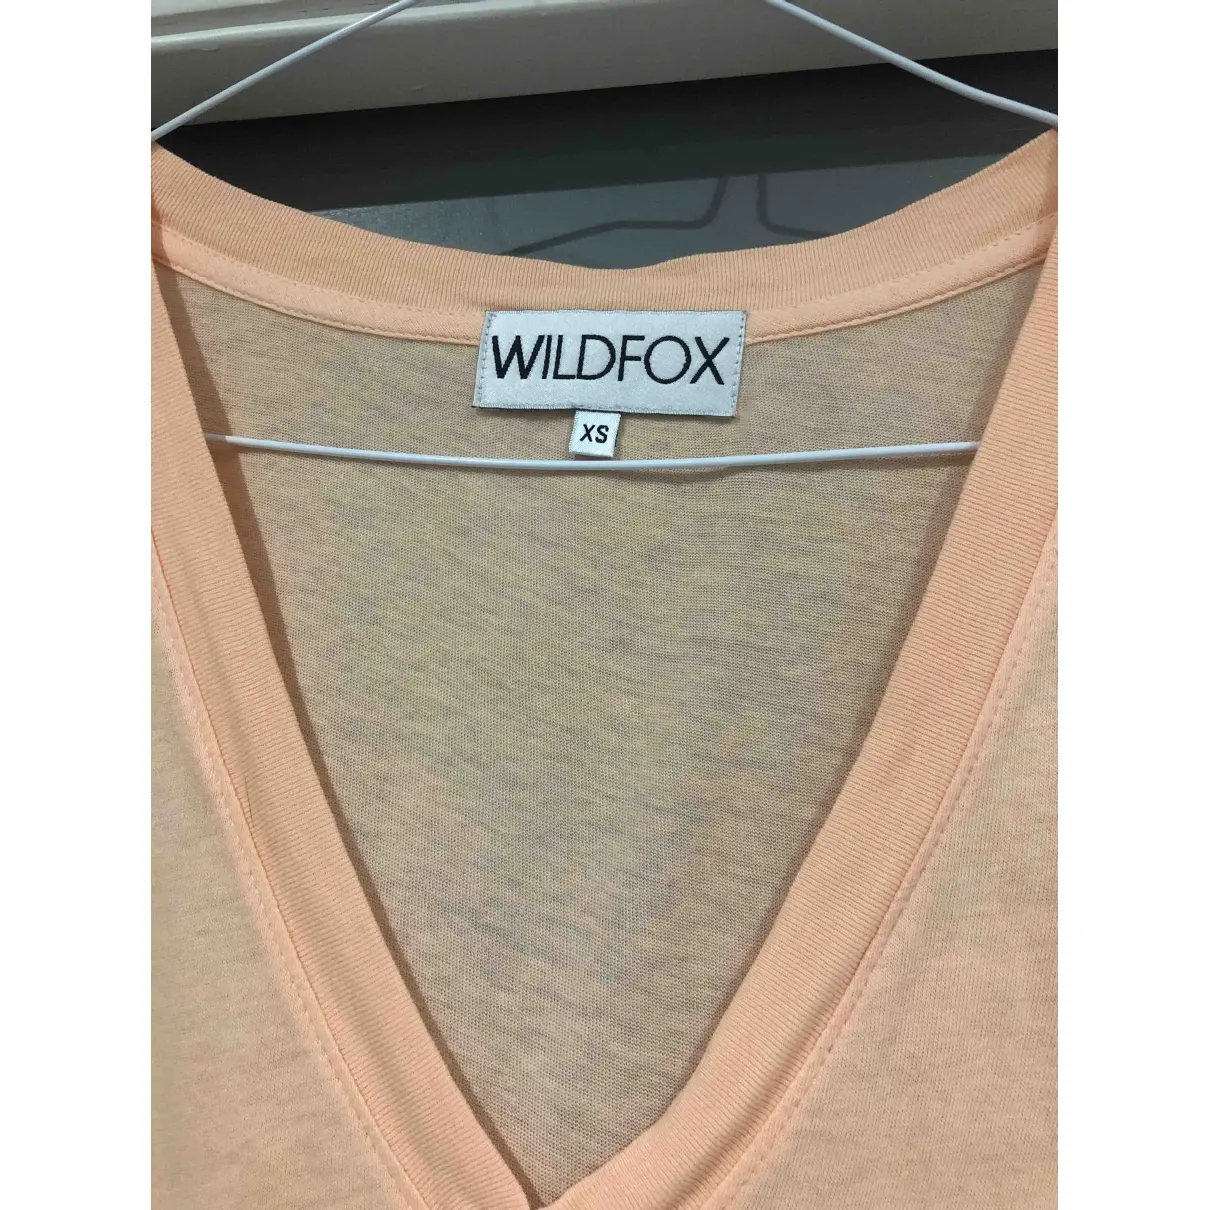 Wildfox T-shirt for sale